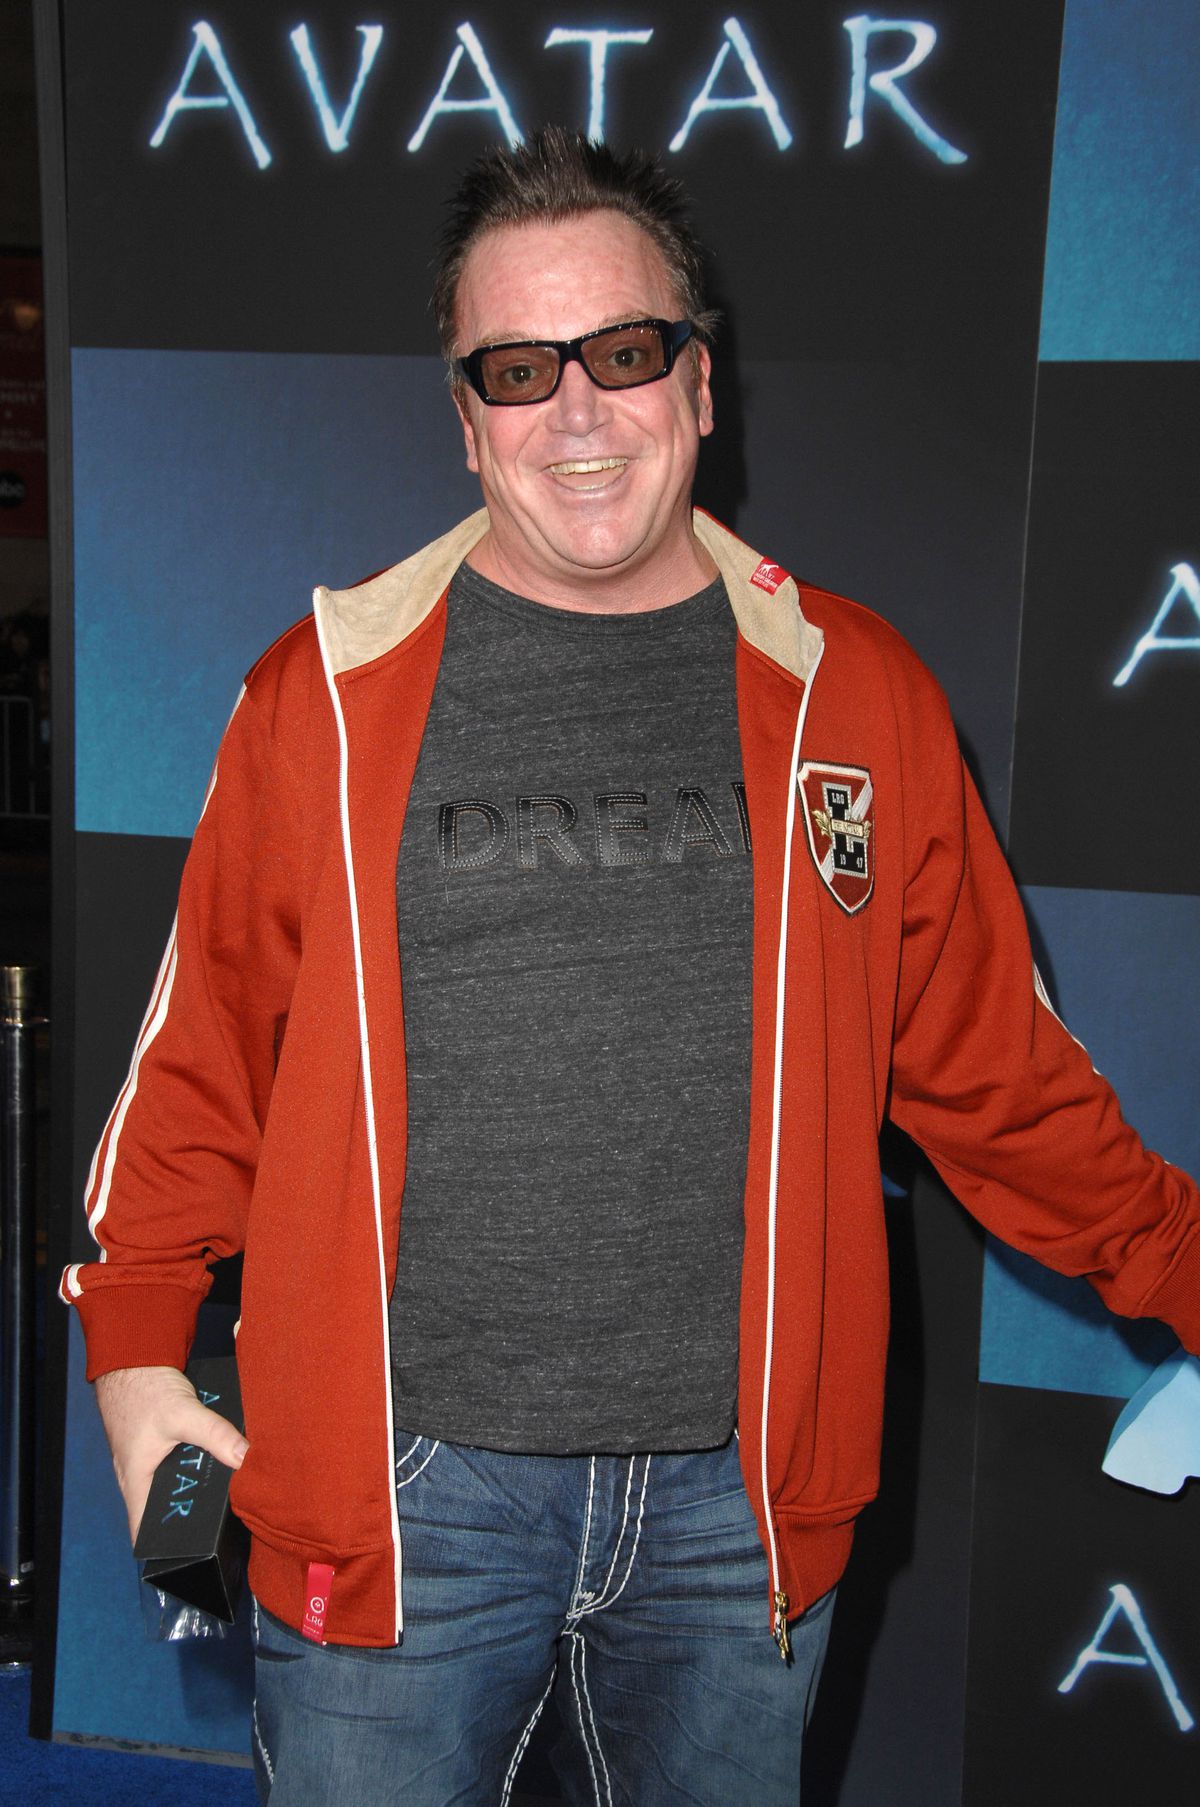 Tom Arnold in a scarlet jacket and 3D glasses actually appeared with a big smile on the Avatar premiere